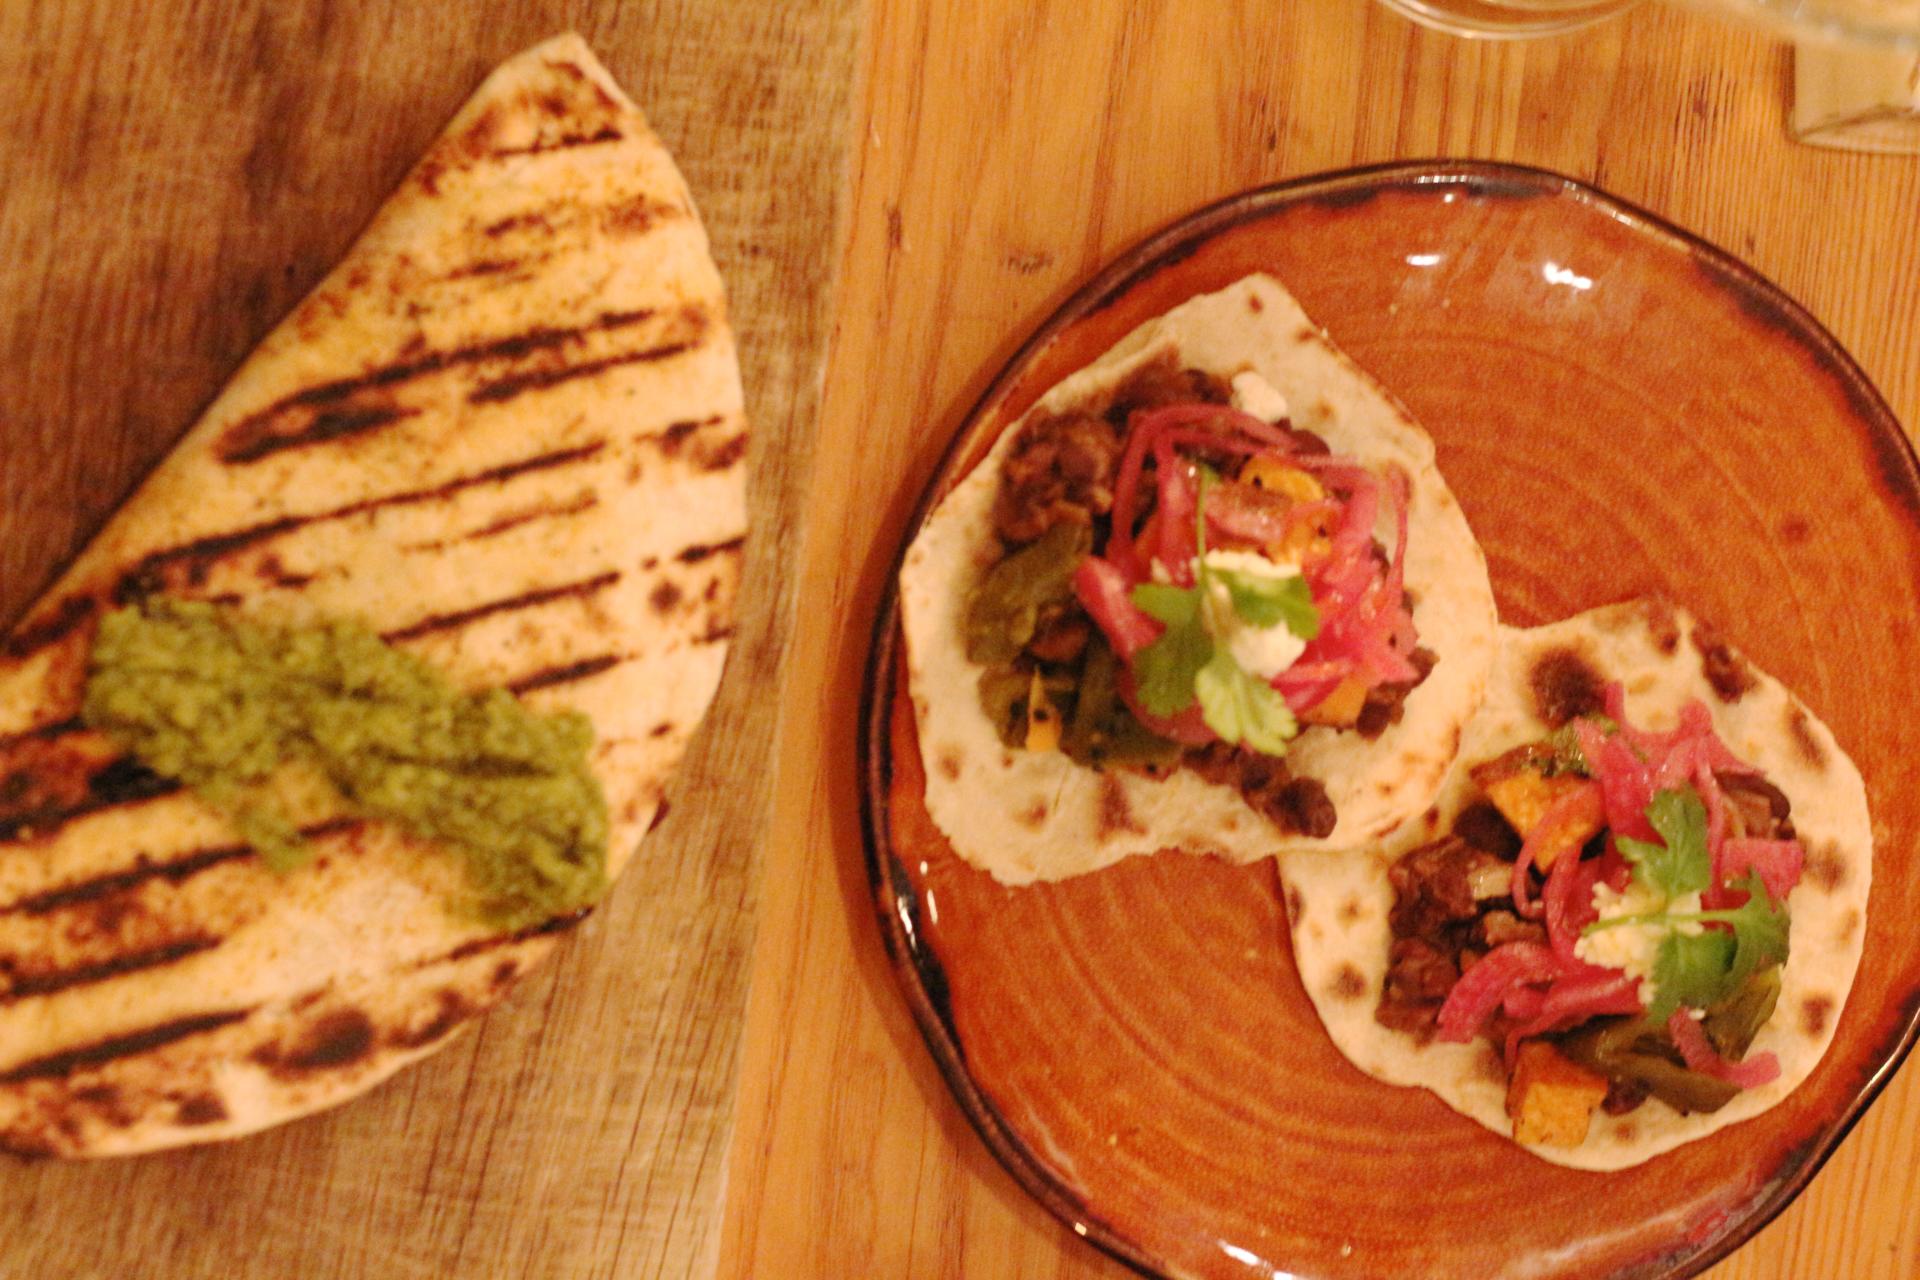 Y Fabrica Mexican Restaurant Didsbury Manchester Review